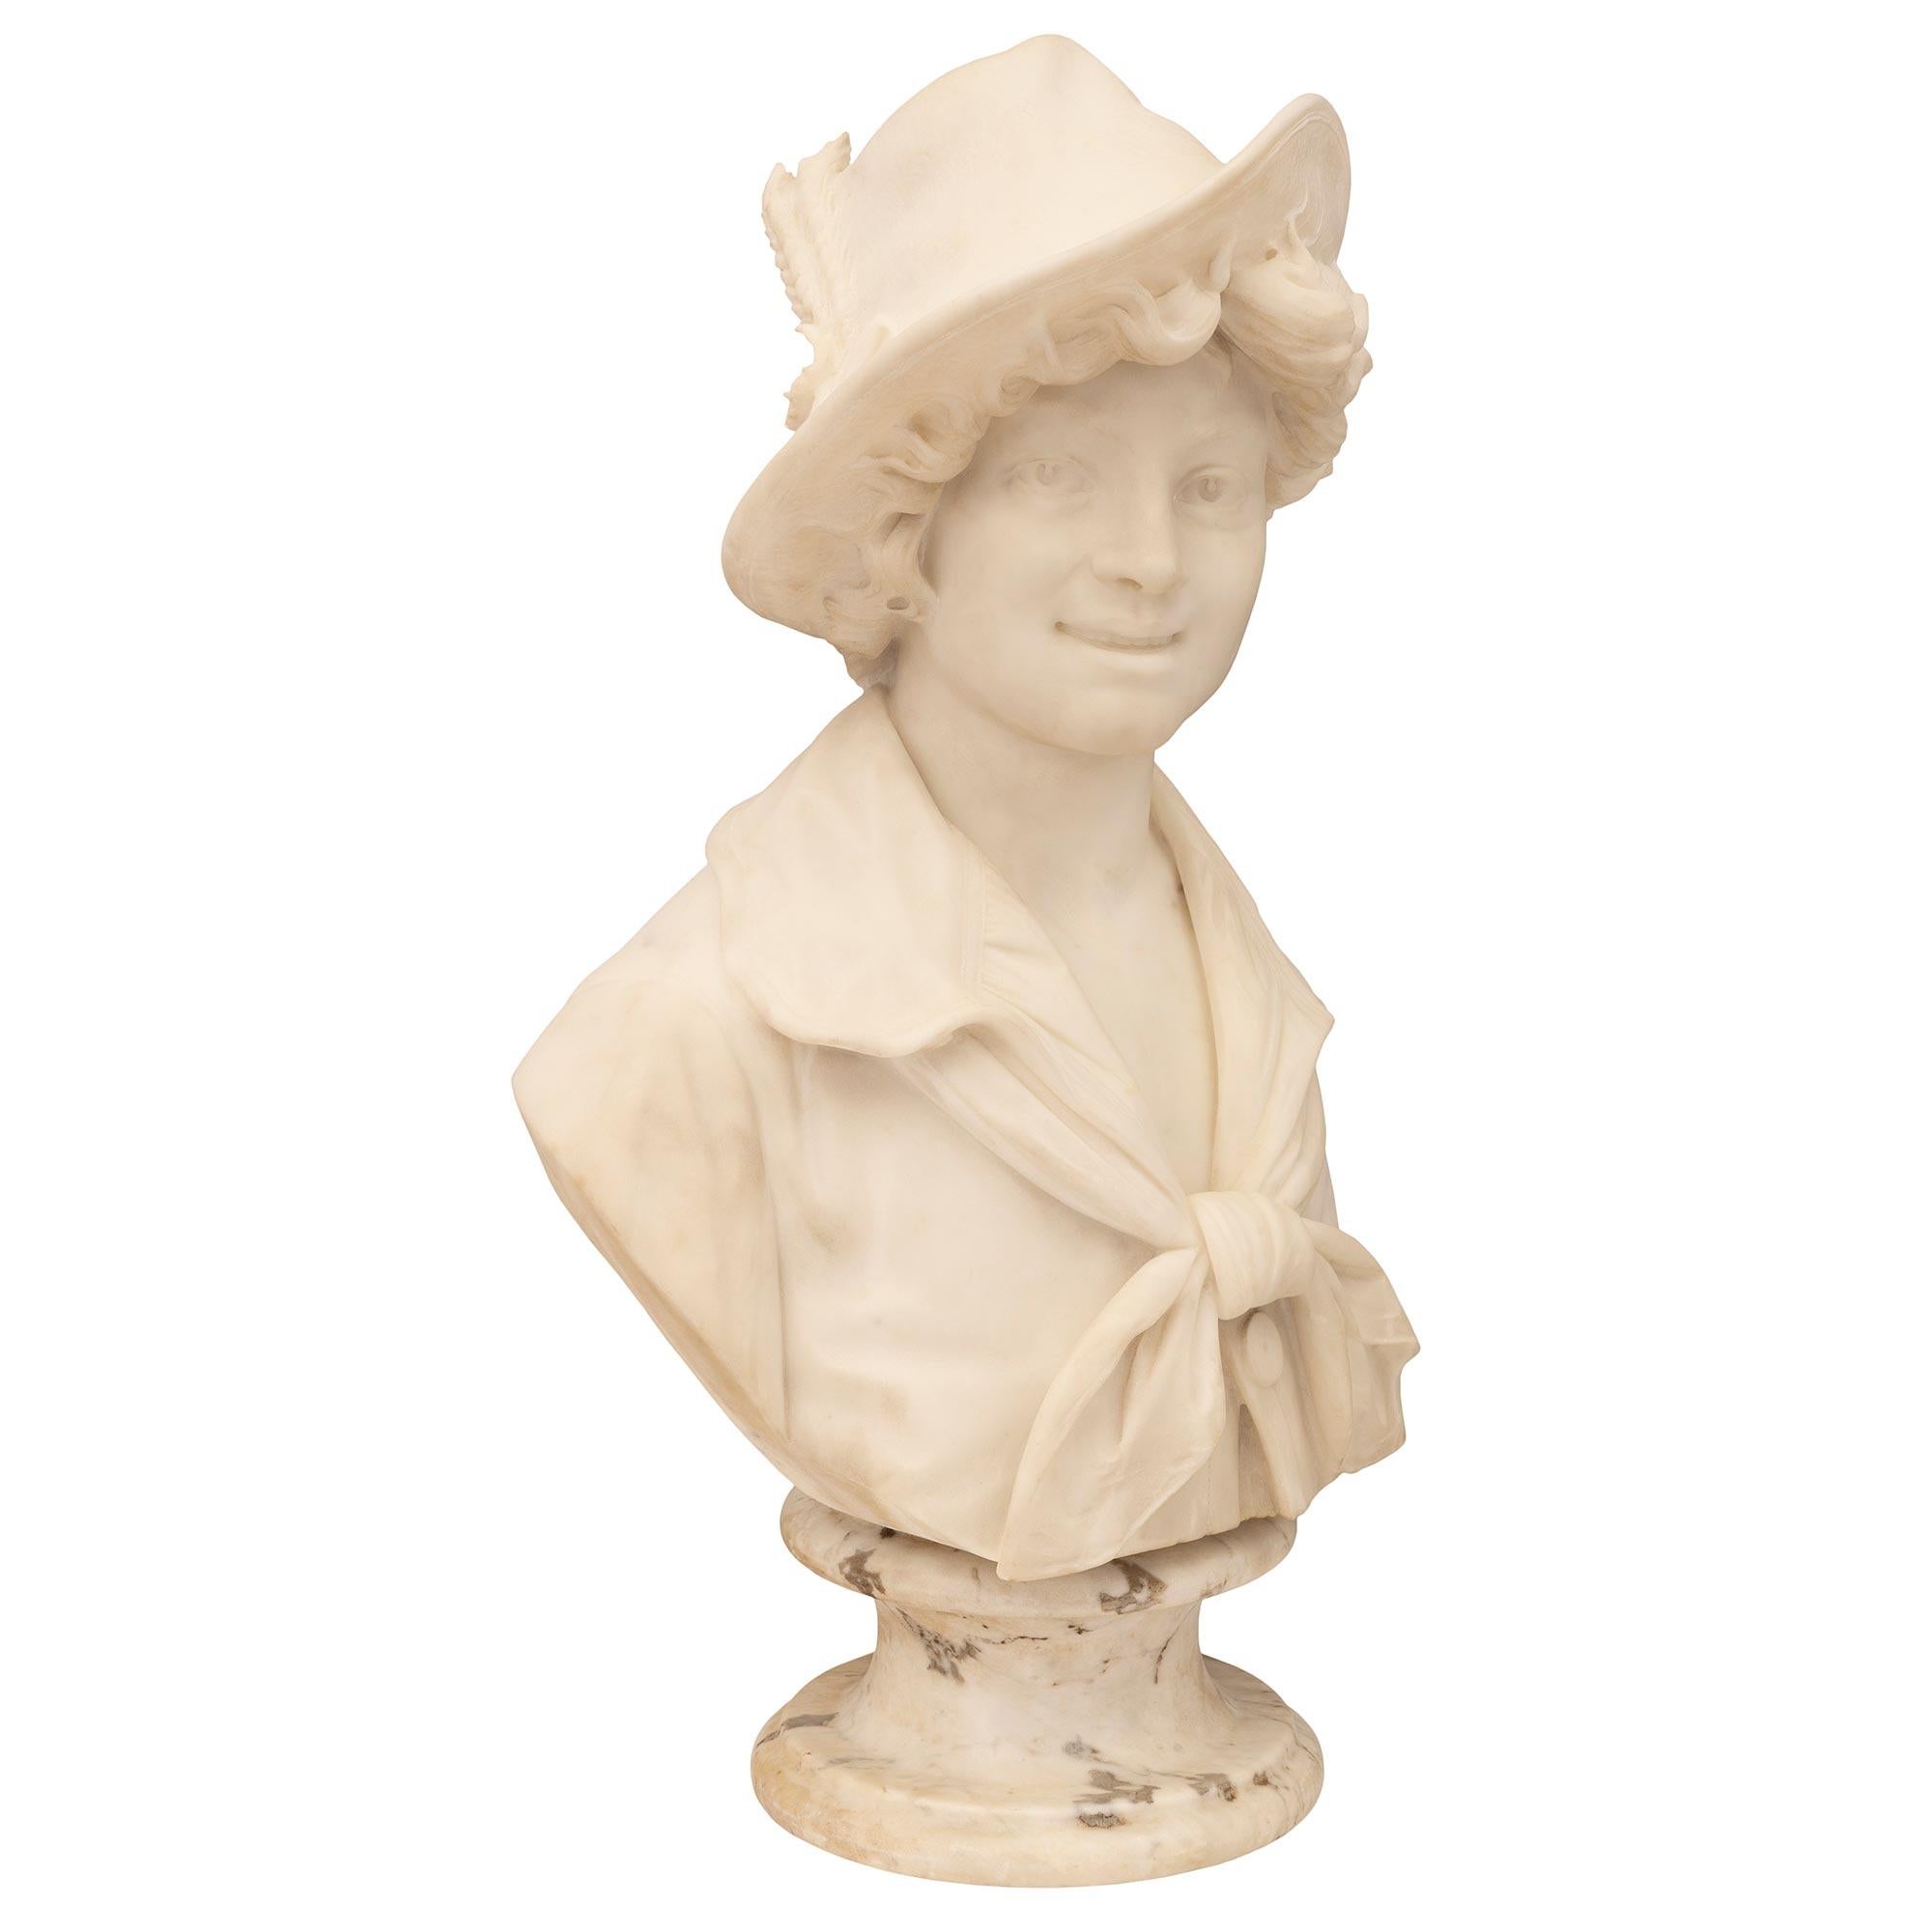 A beautiful and very high quality Italian 19th century white Carrara marble bust of a young boy. The bust is raised by an elegant circular socle shaped pedestal support with a fine mottled border. The richly sculpted bust above depicts a charming